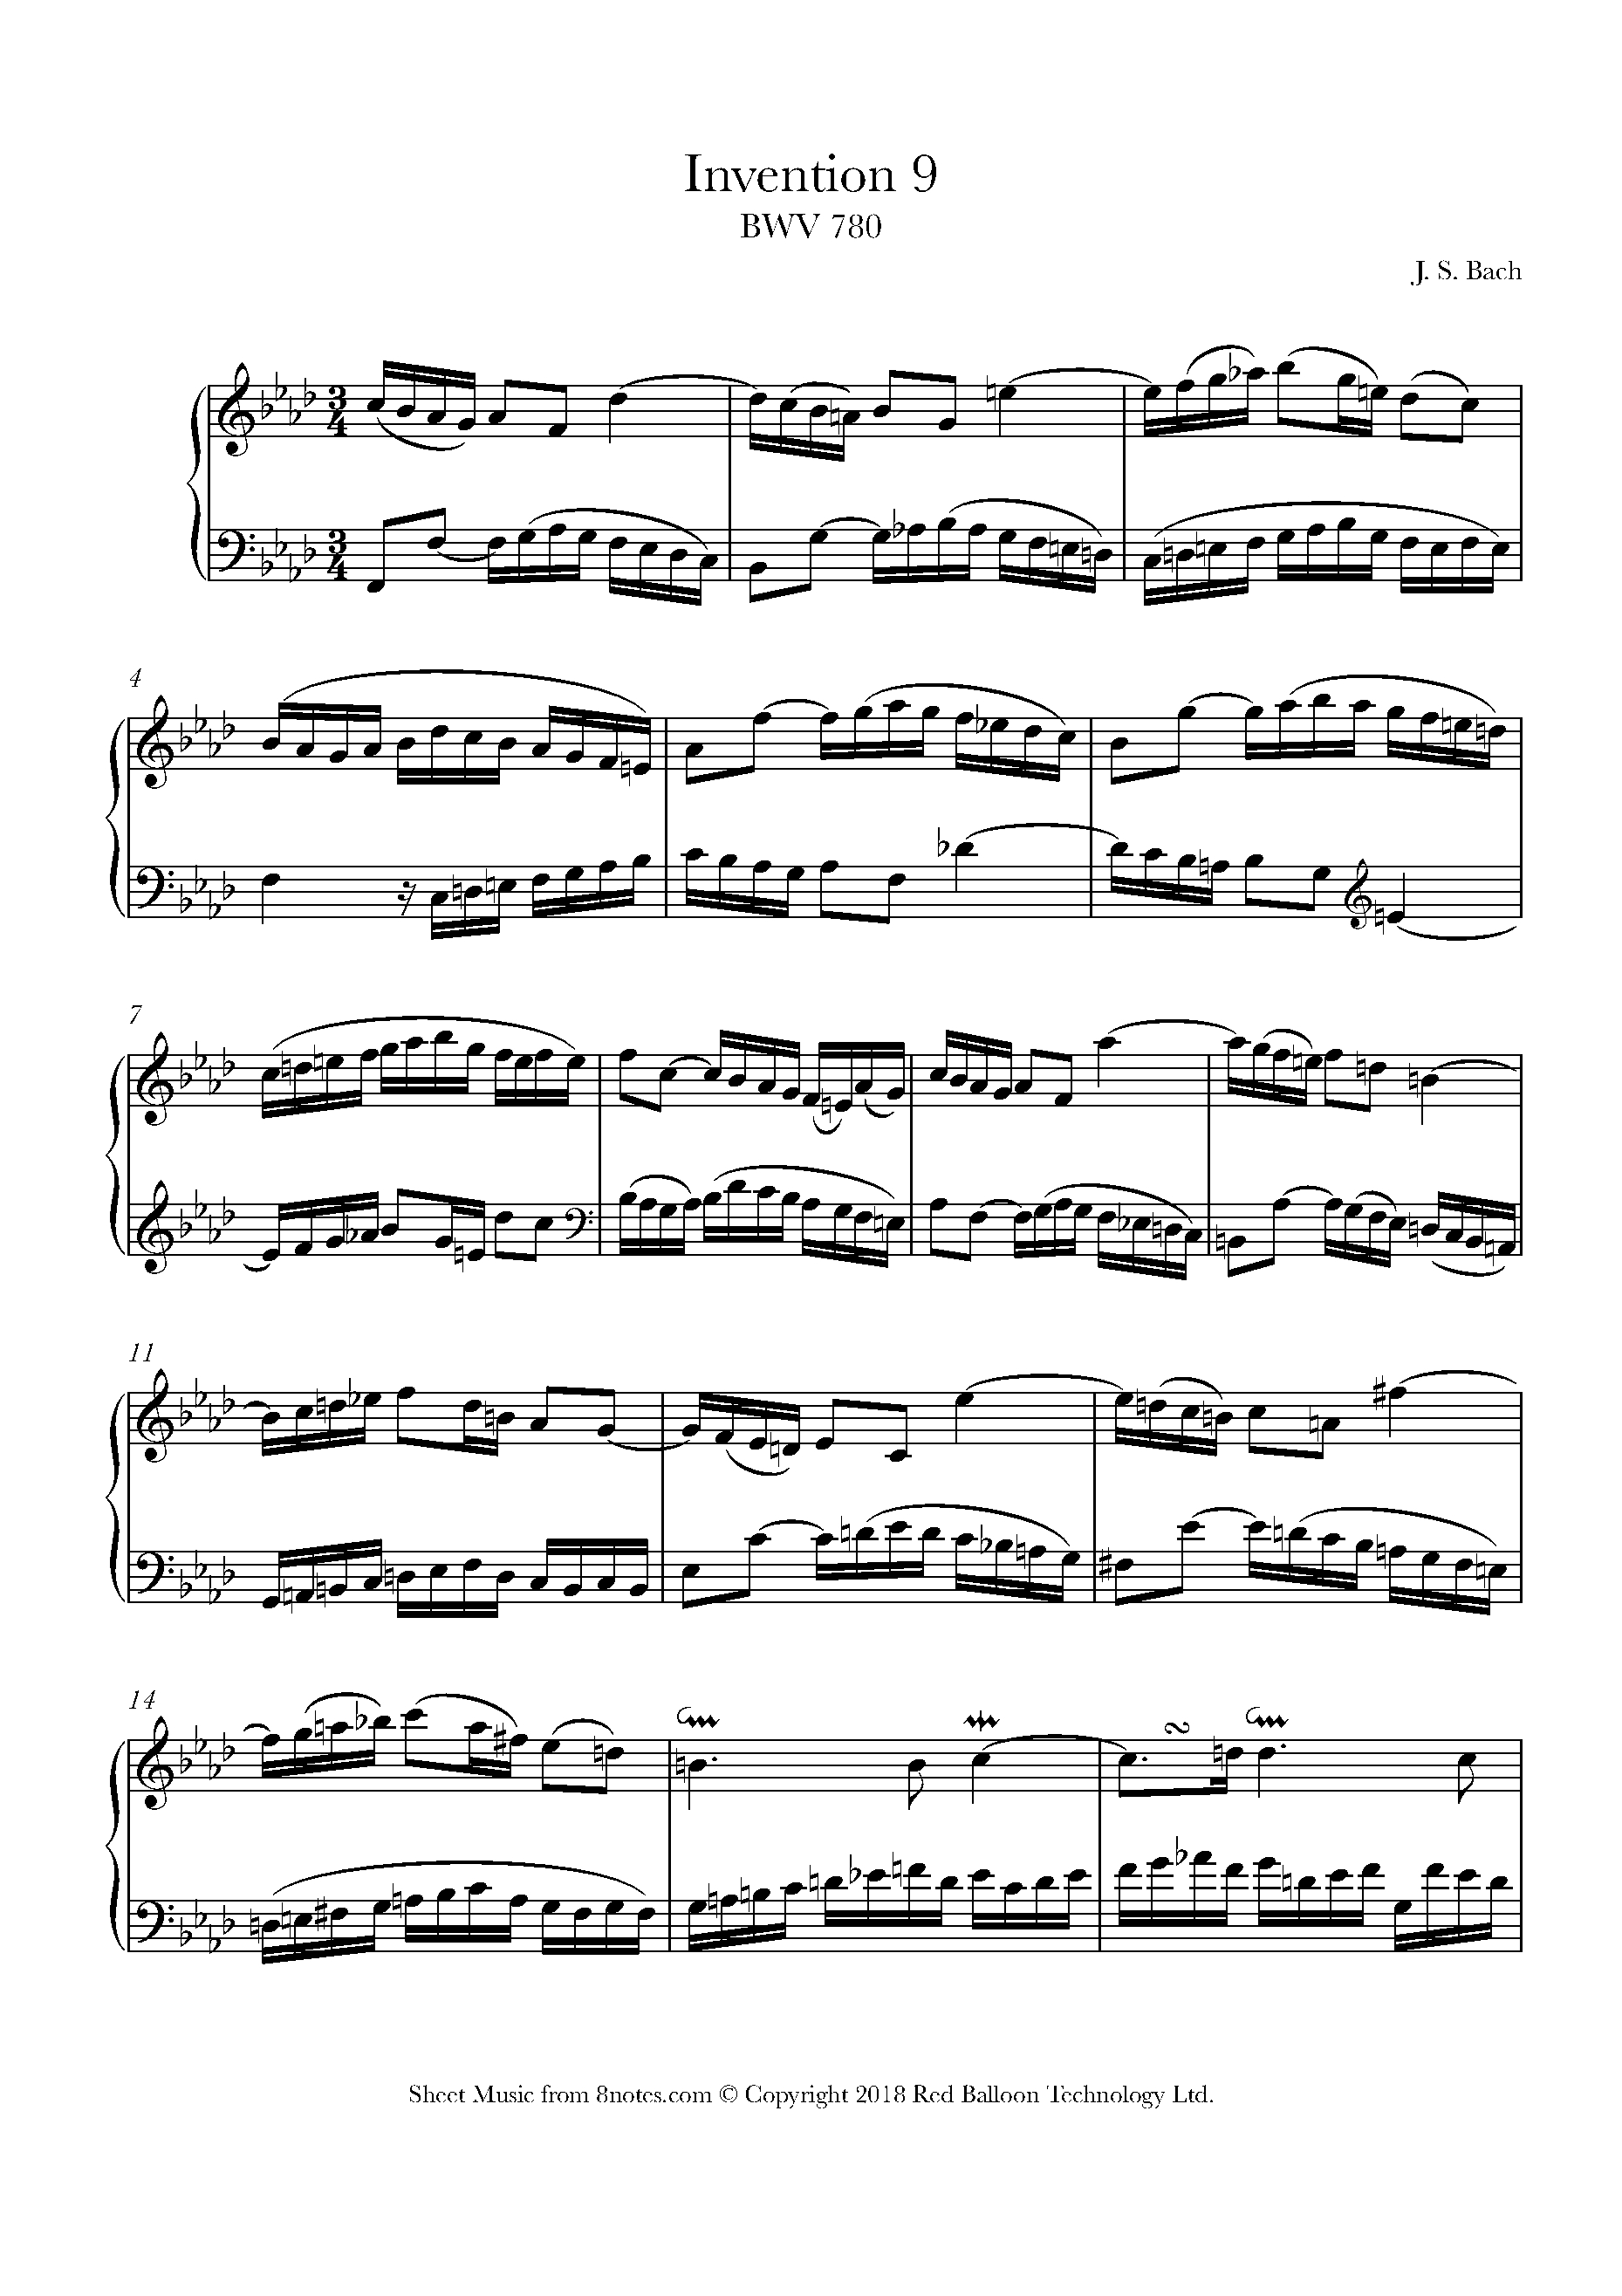 Free Piano Sheet Music, Lessons &amp;amp; Resources - 8Notes - Free Piano Sheet Music Online Printable Popular Songs